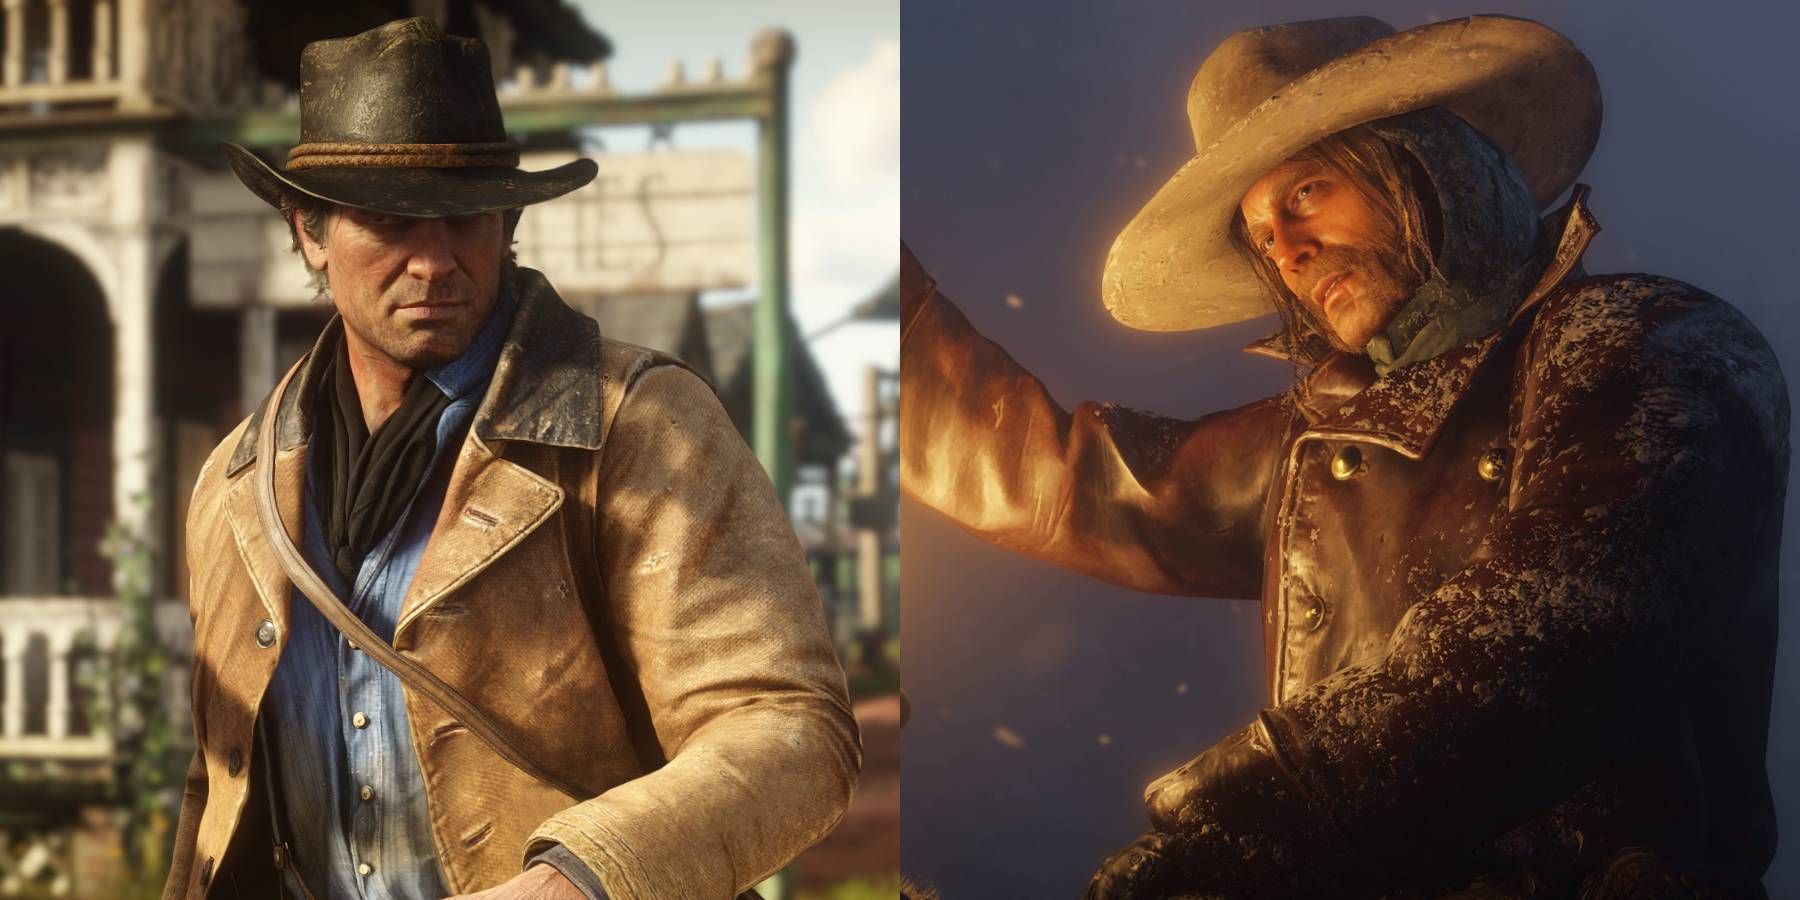 Red Dead Redemption 2: Arthur Morgan and Micah's Hats Are On the Wrong ...